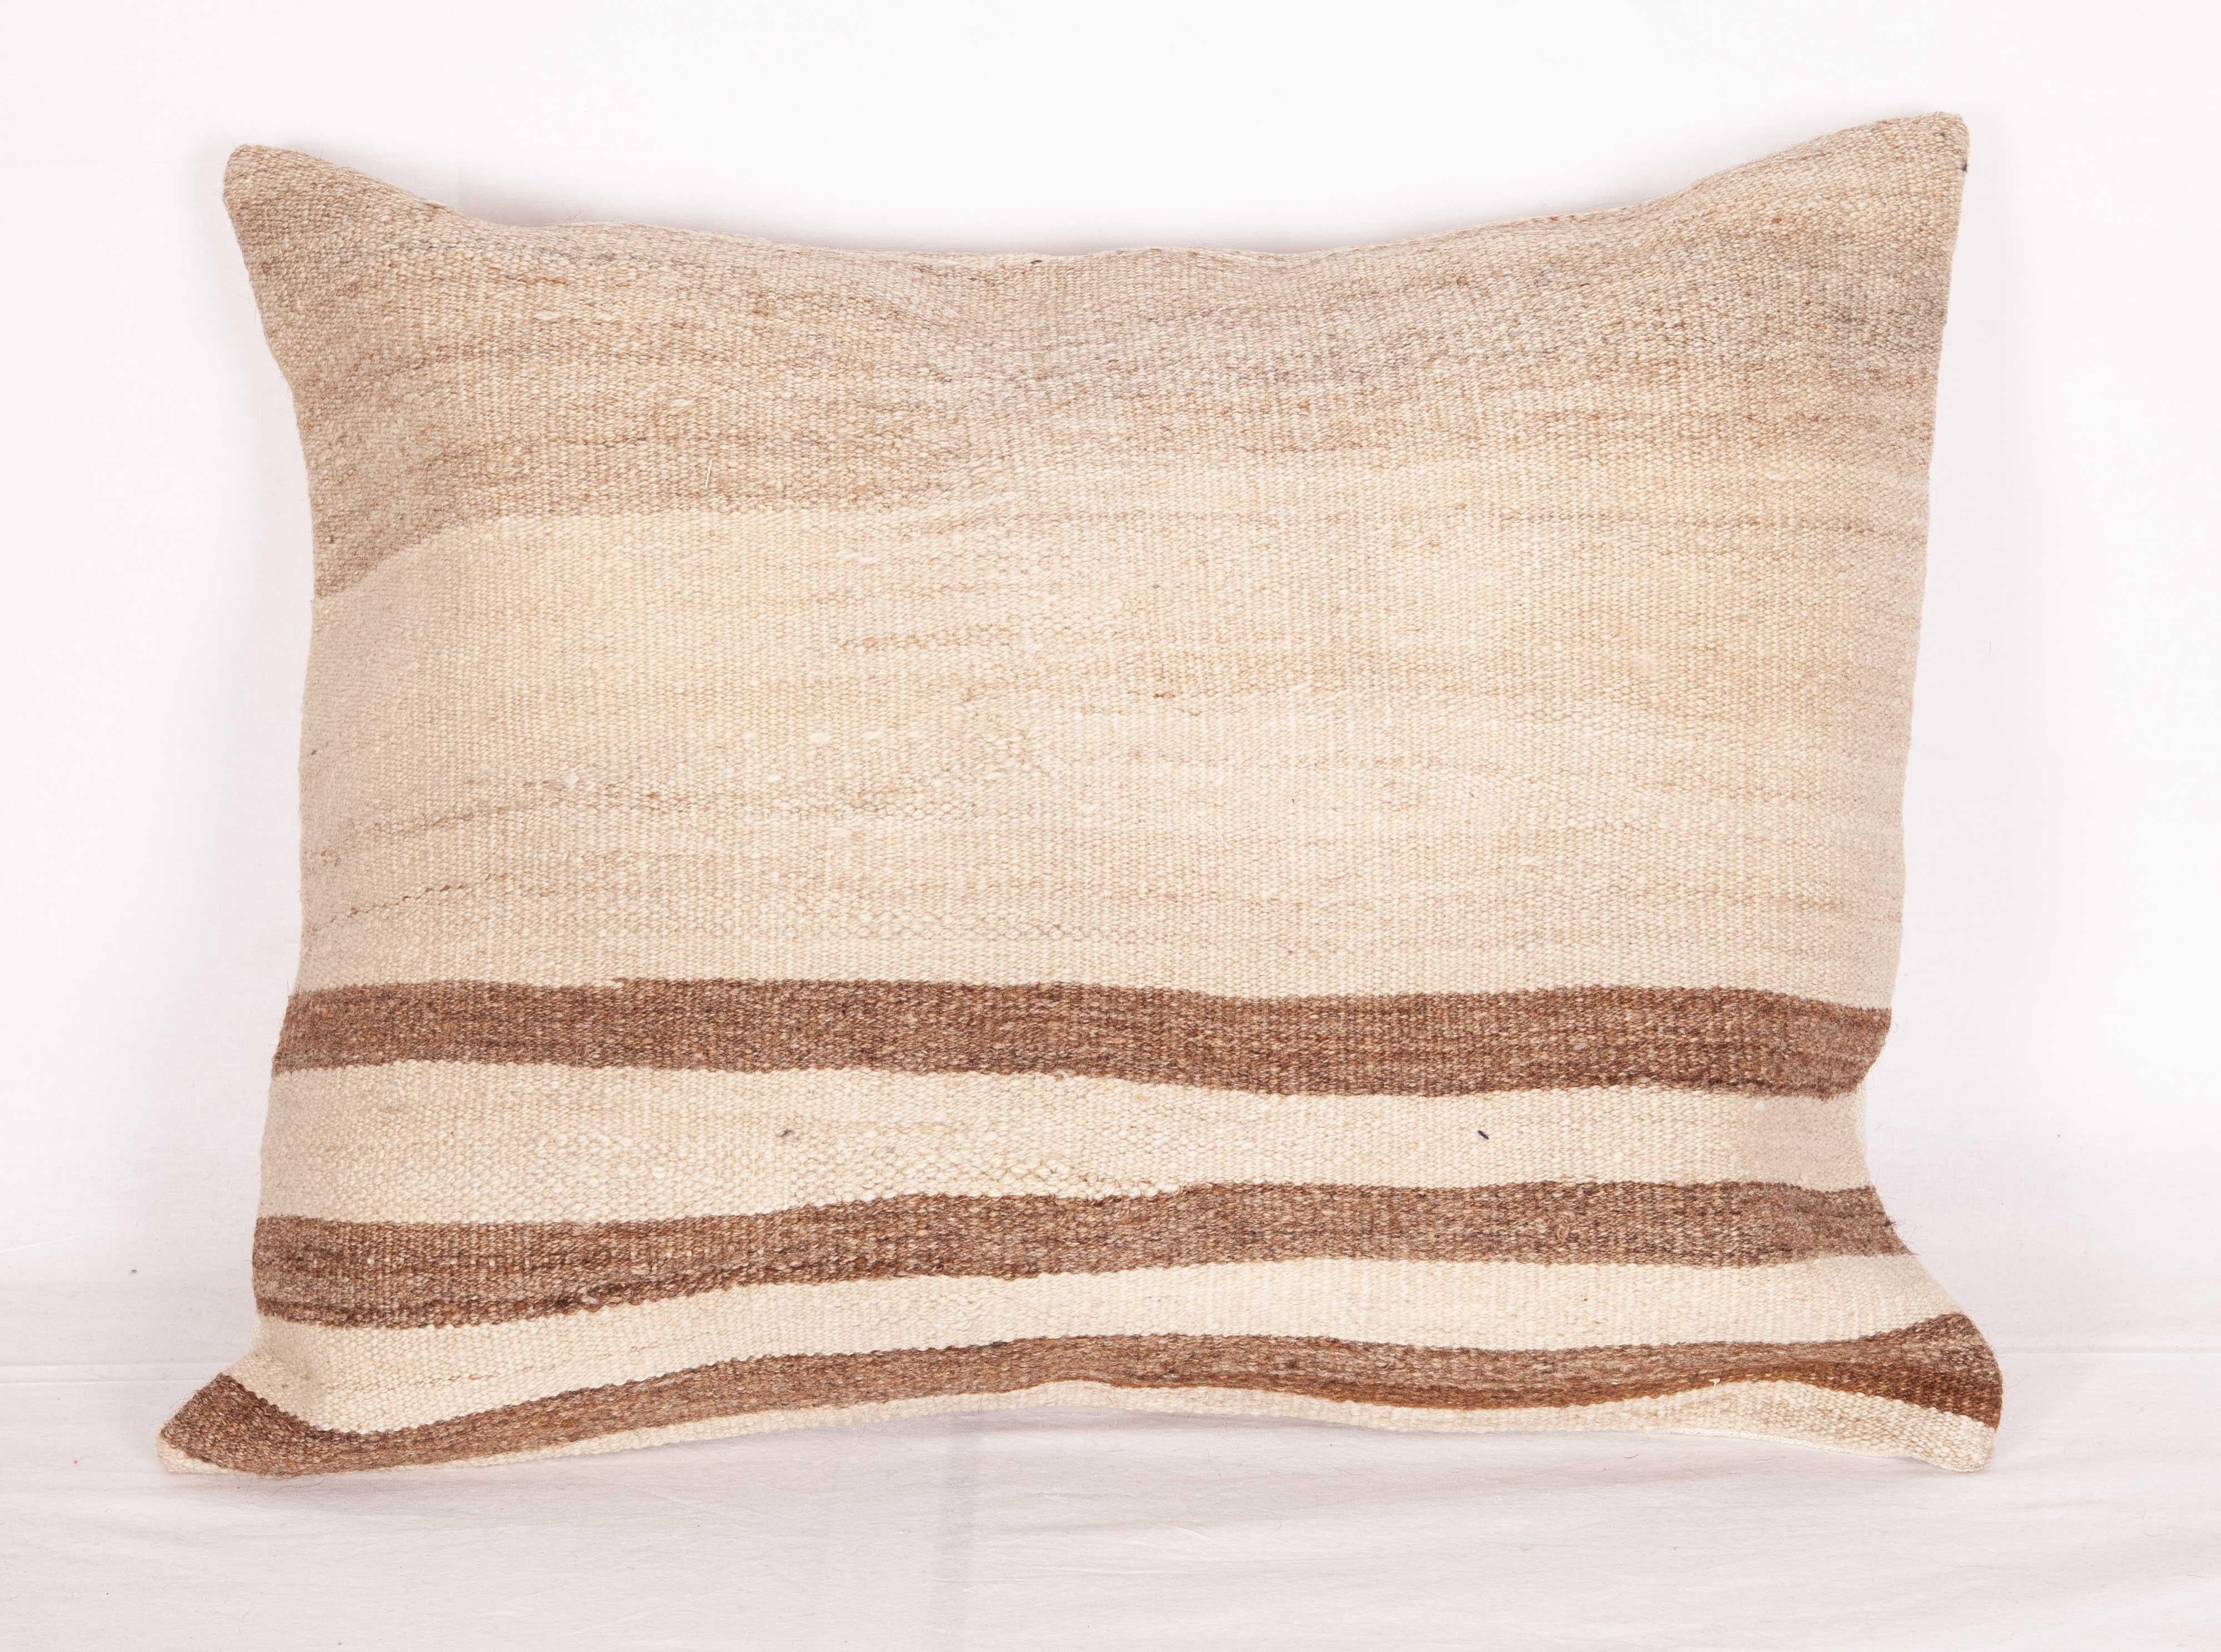 Hand-Woven Pillow Cases Fashioned from a Mid-20th Century Anatolian Neutral Kilim